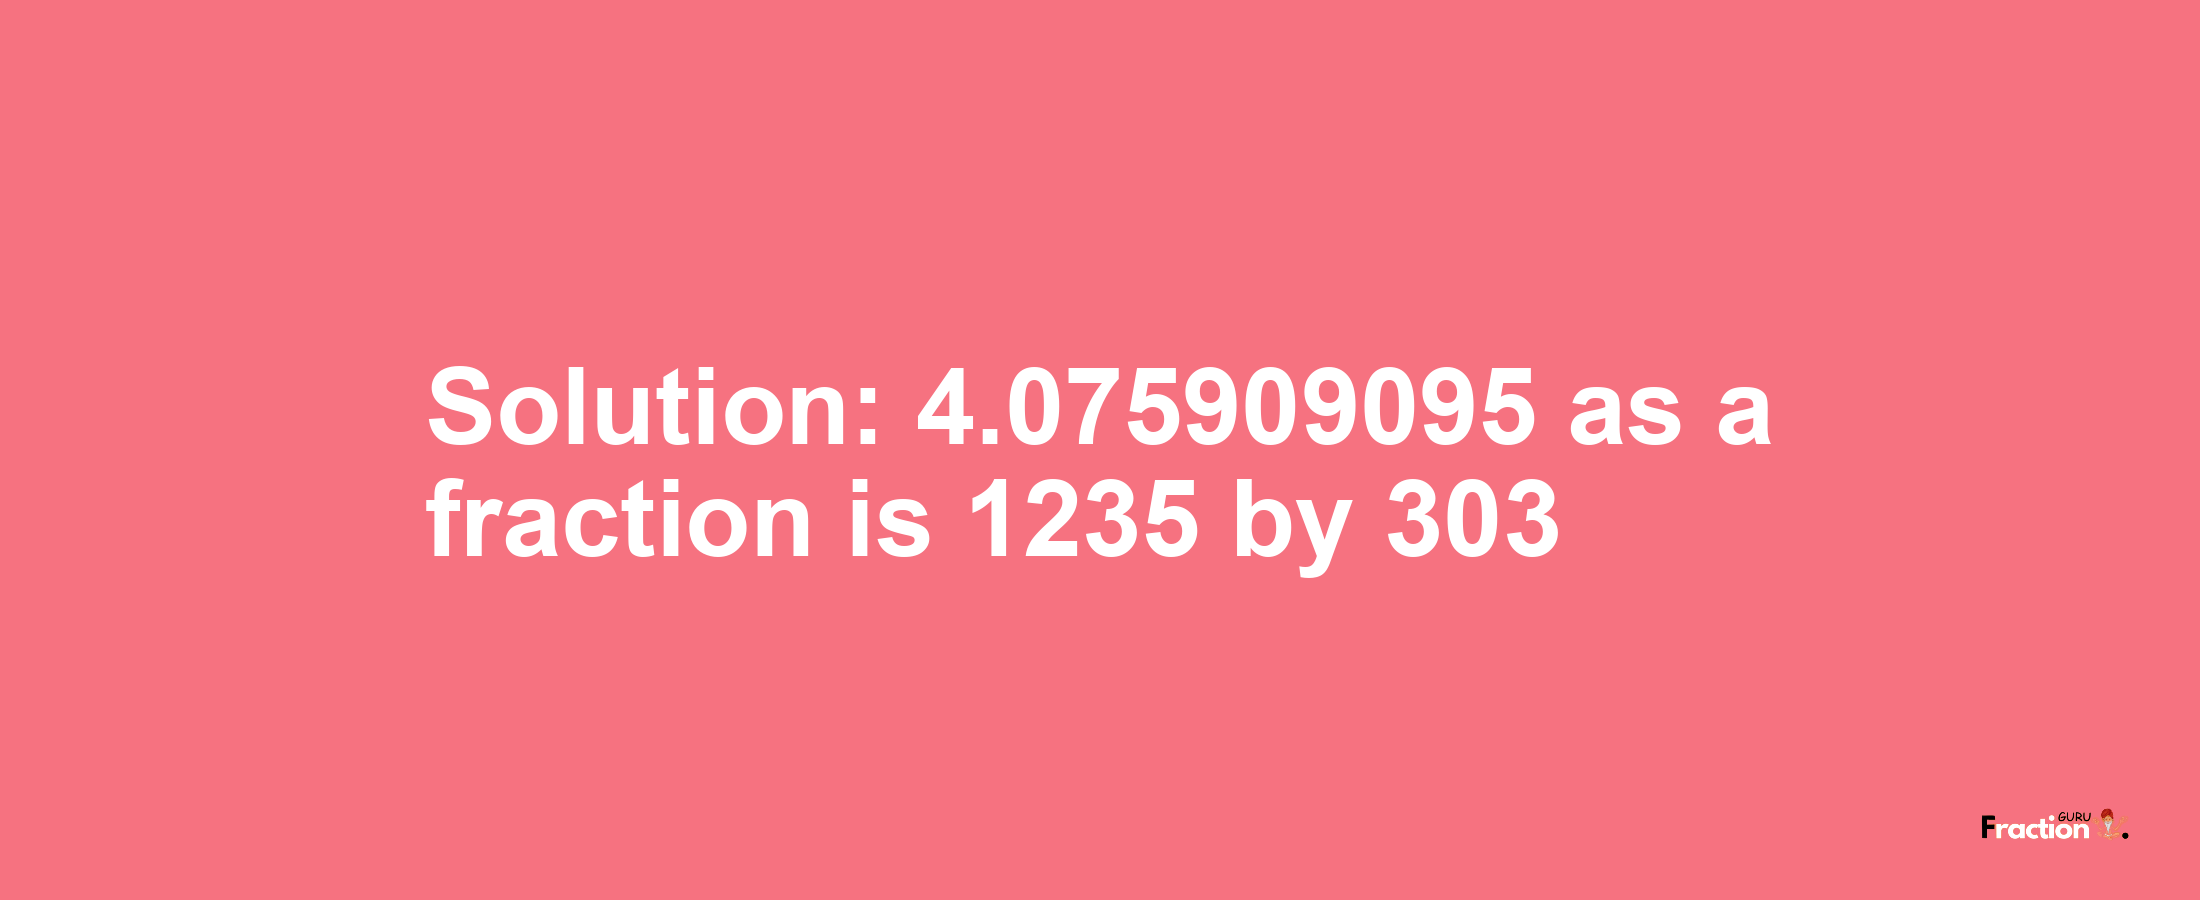 Solution:4.075909095 as a fraction is 1235/303